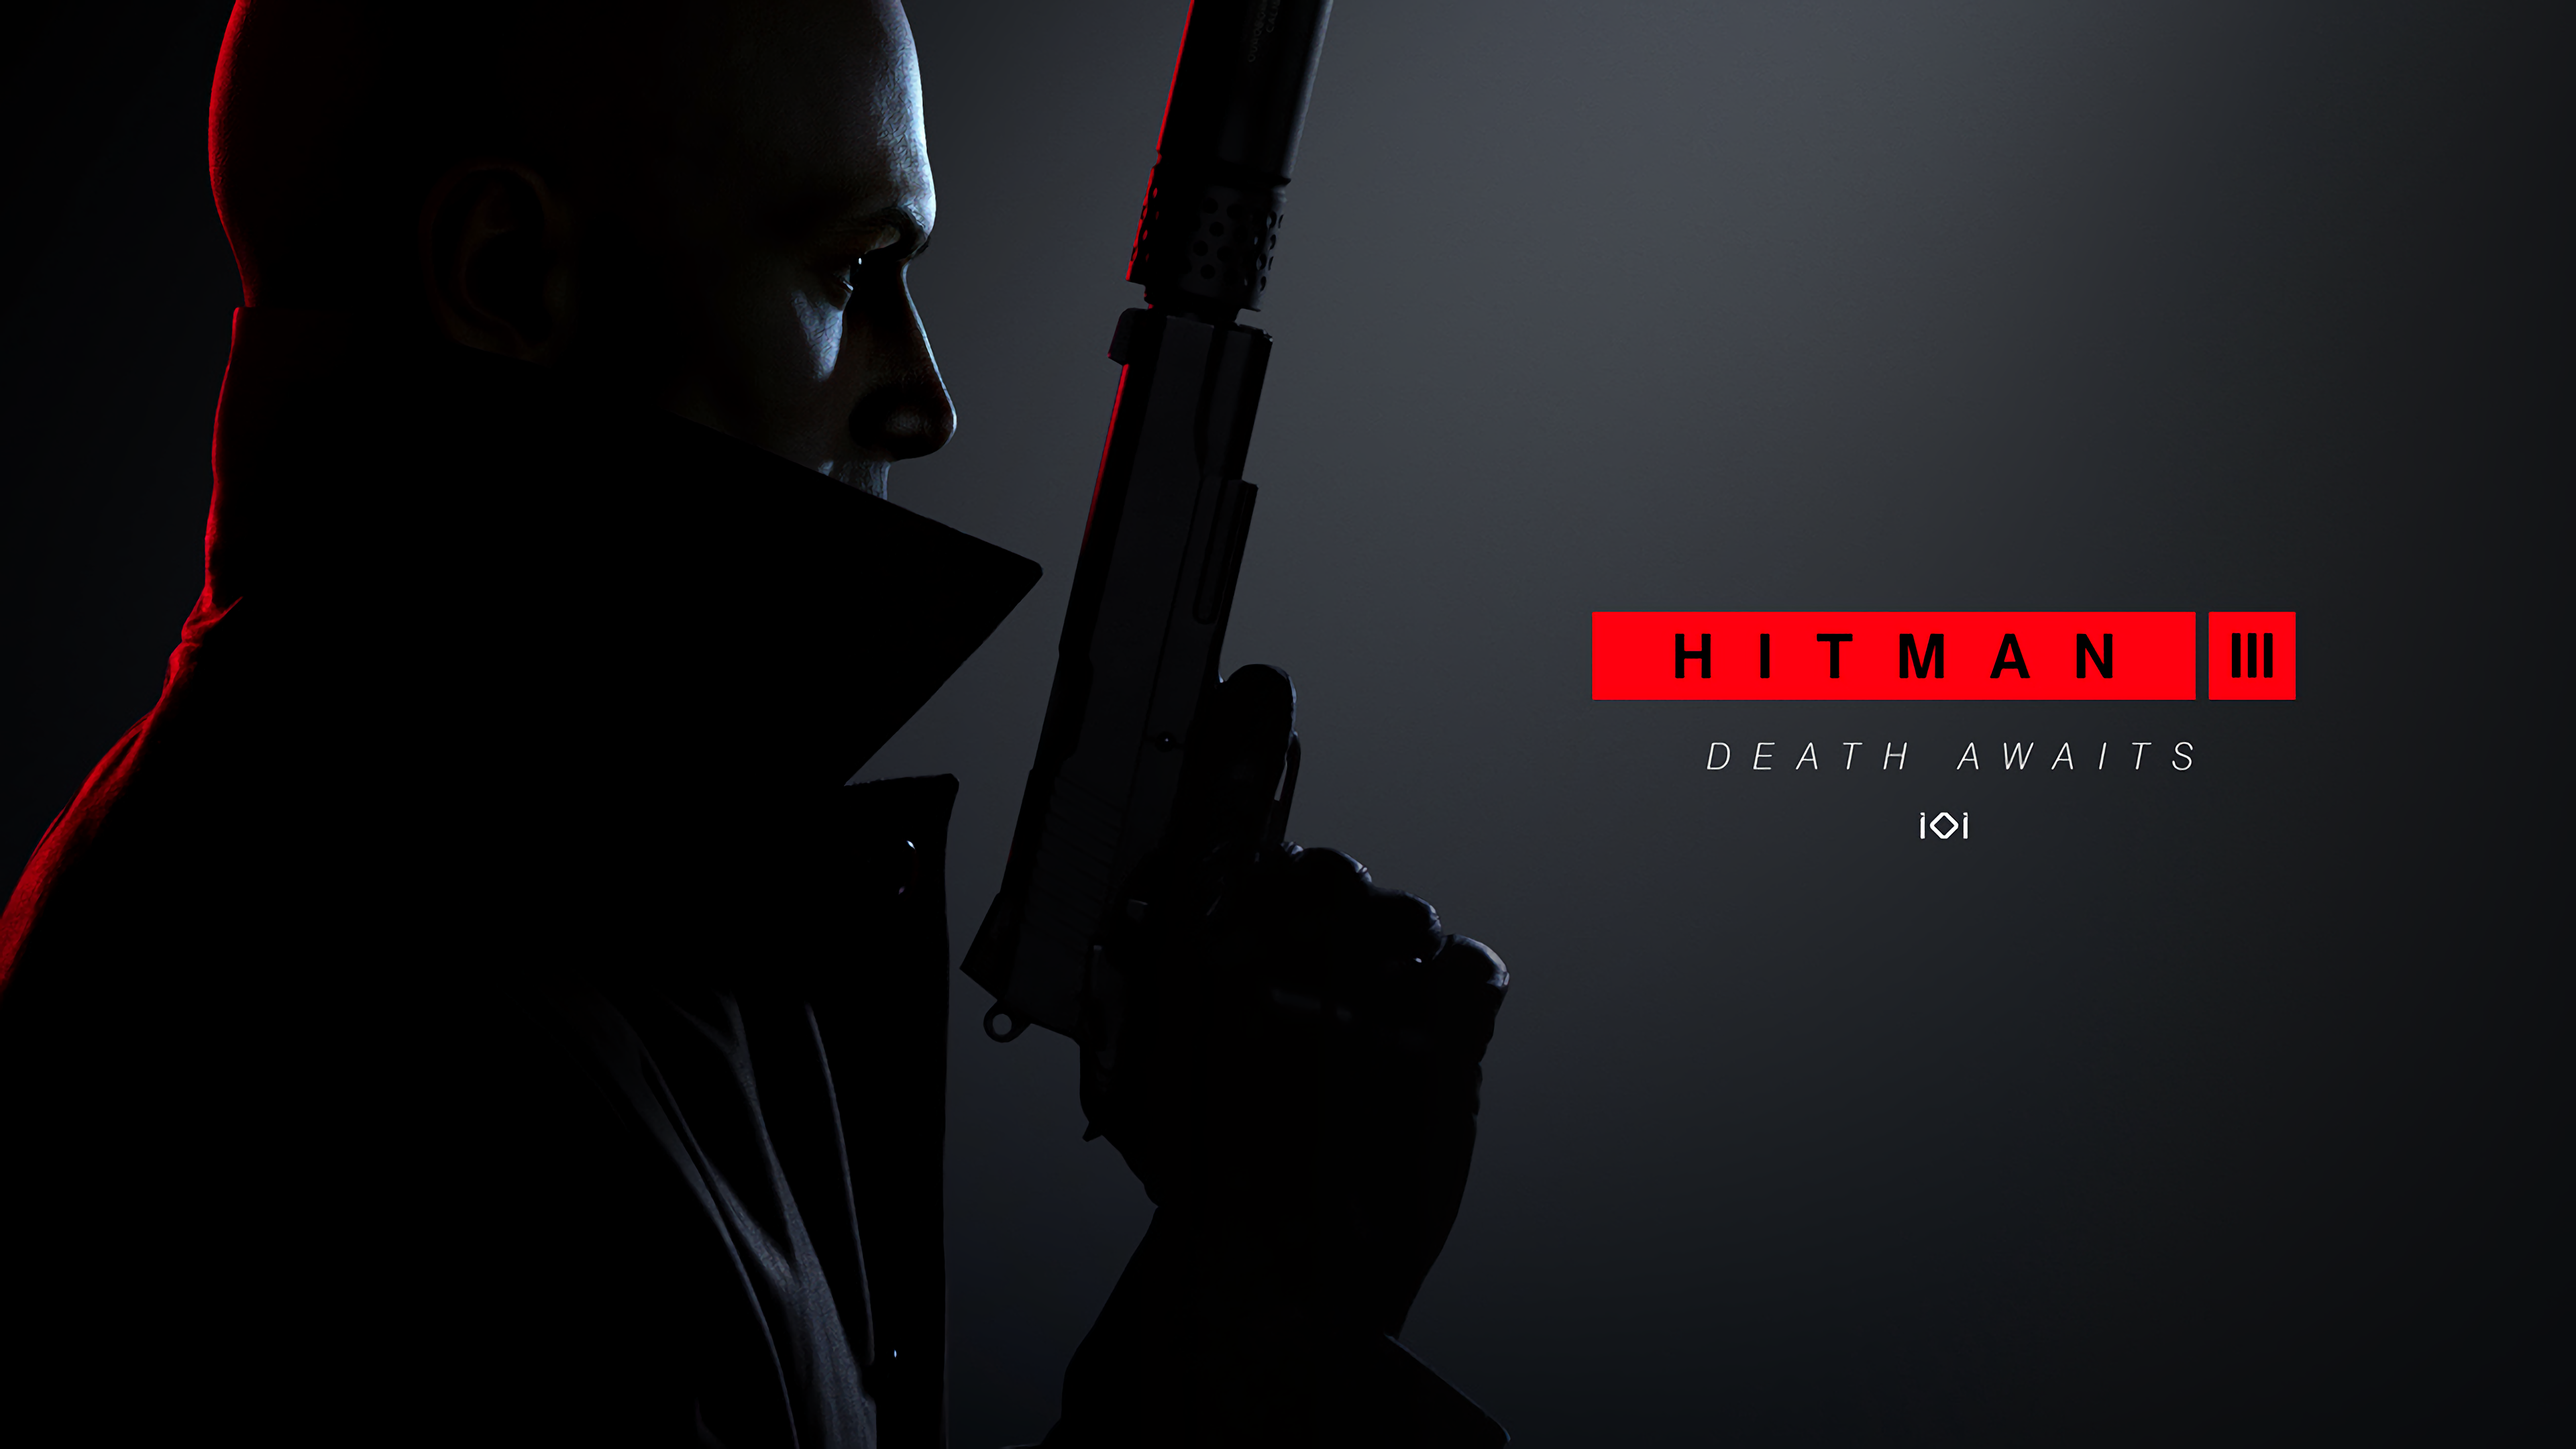 Edited Hitman 3 Wallpaper For Different Resolutions With And W O